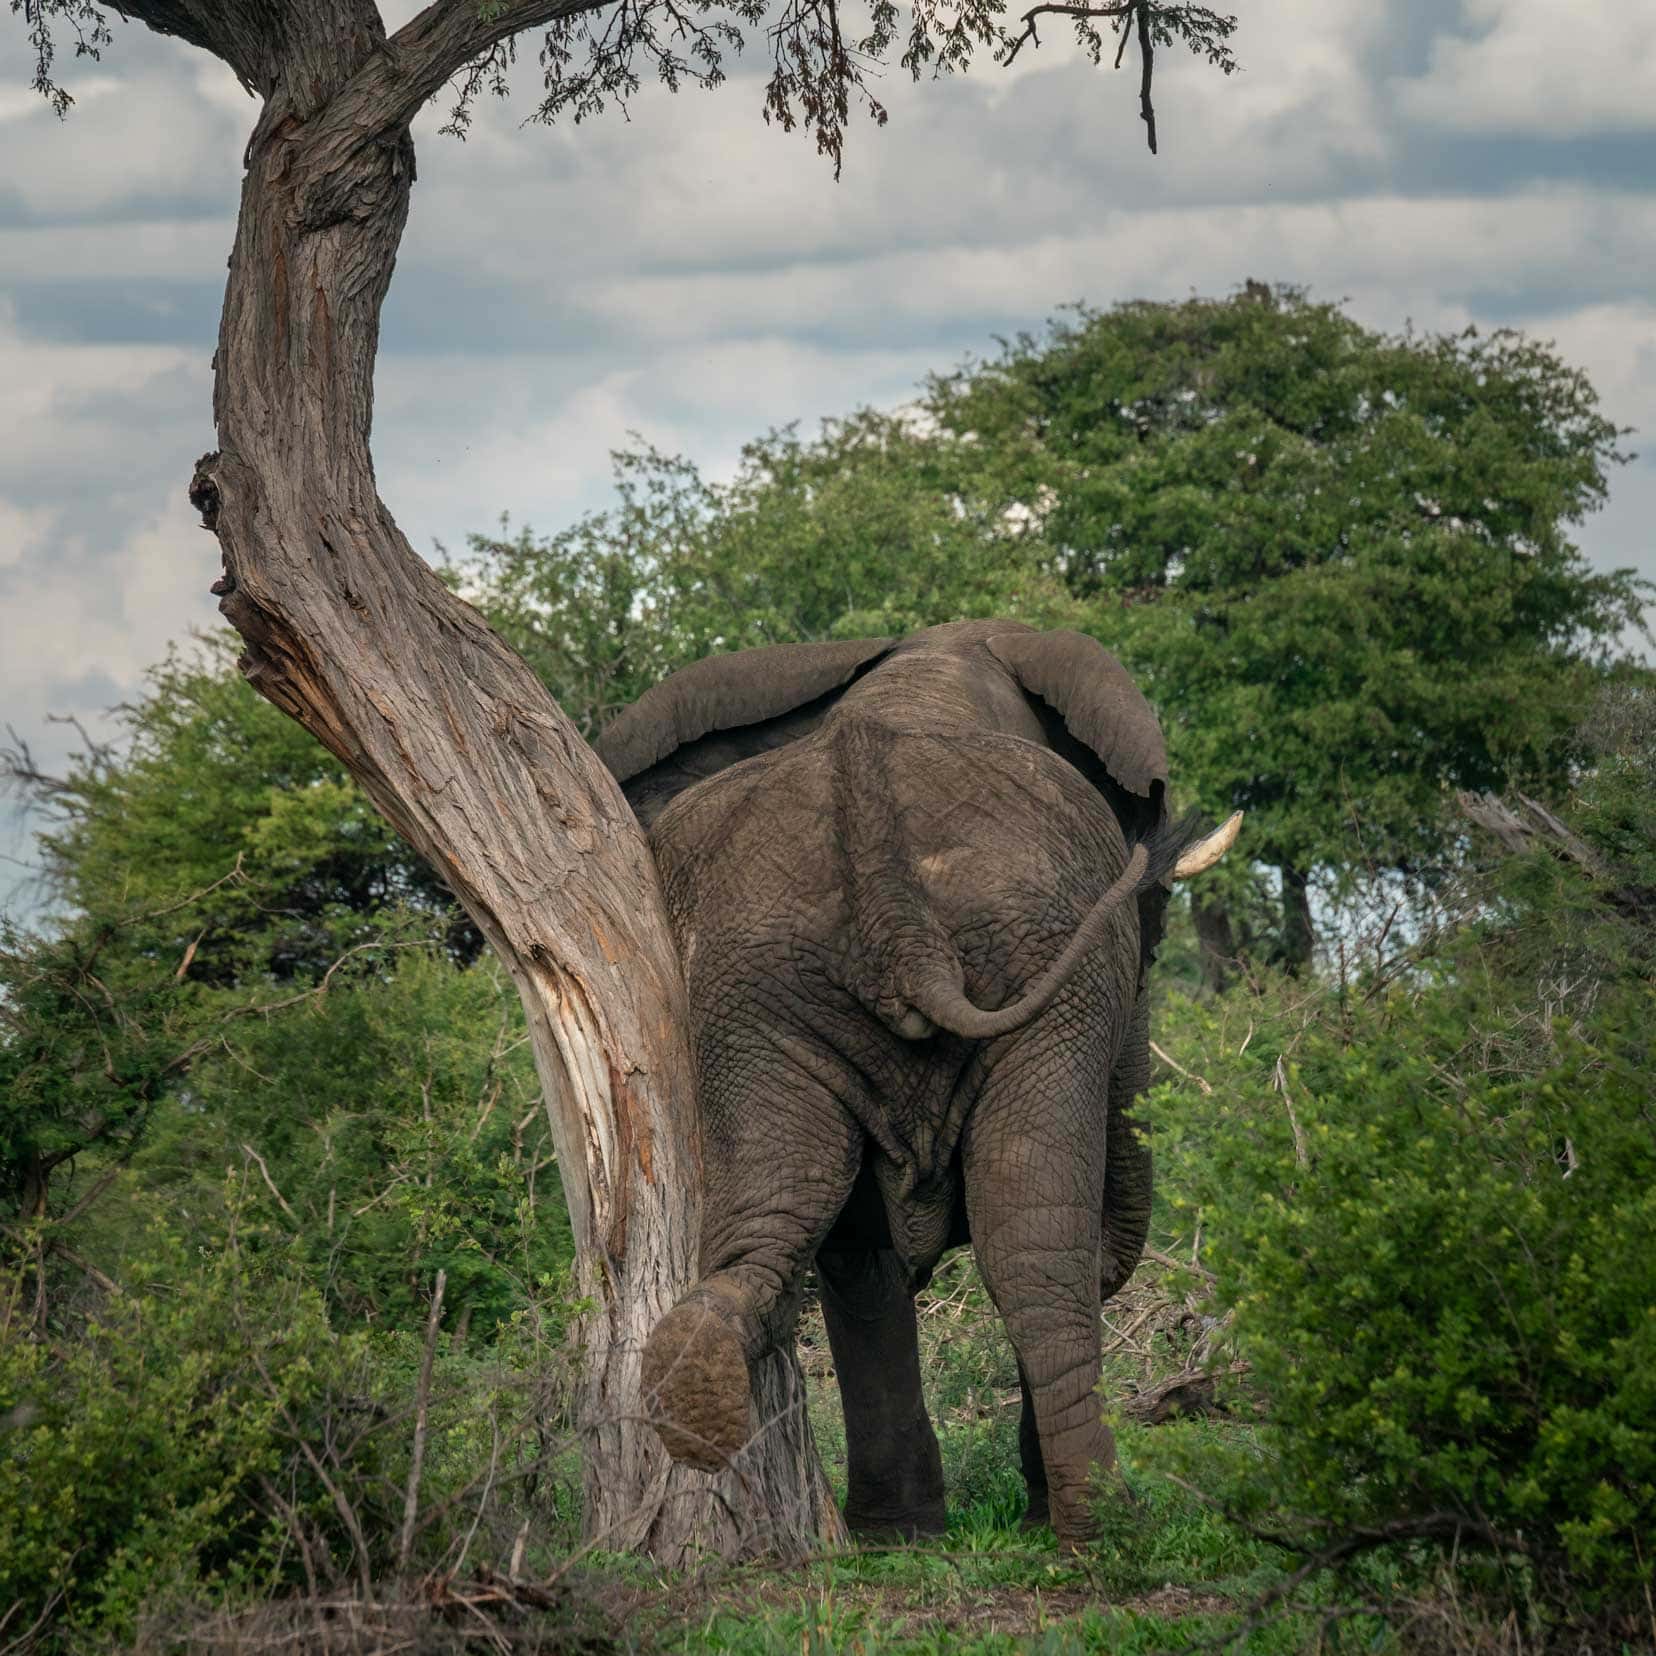 Elephnat straching its leg on a tree trunk in the campgrounds of Kumaga Camp in Makgadikgadi National Park